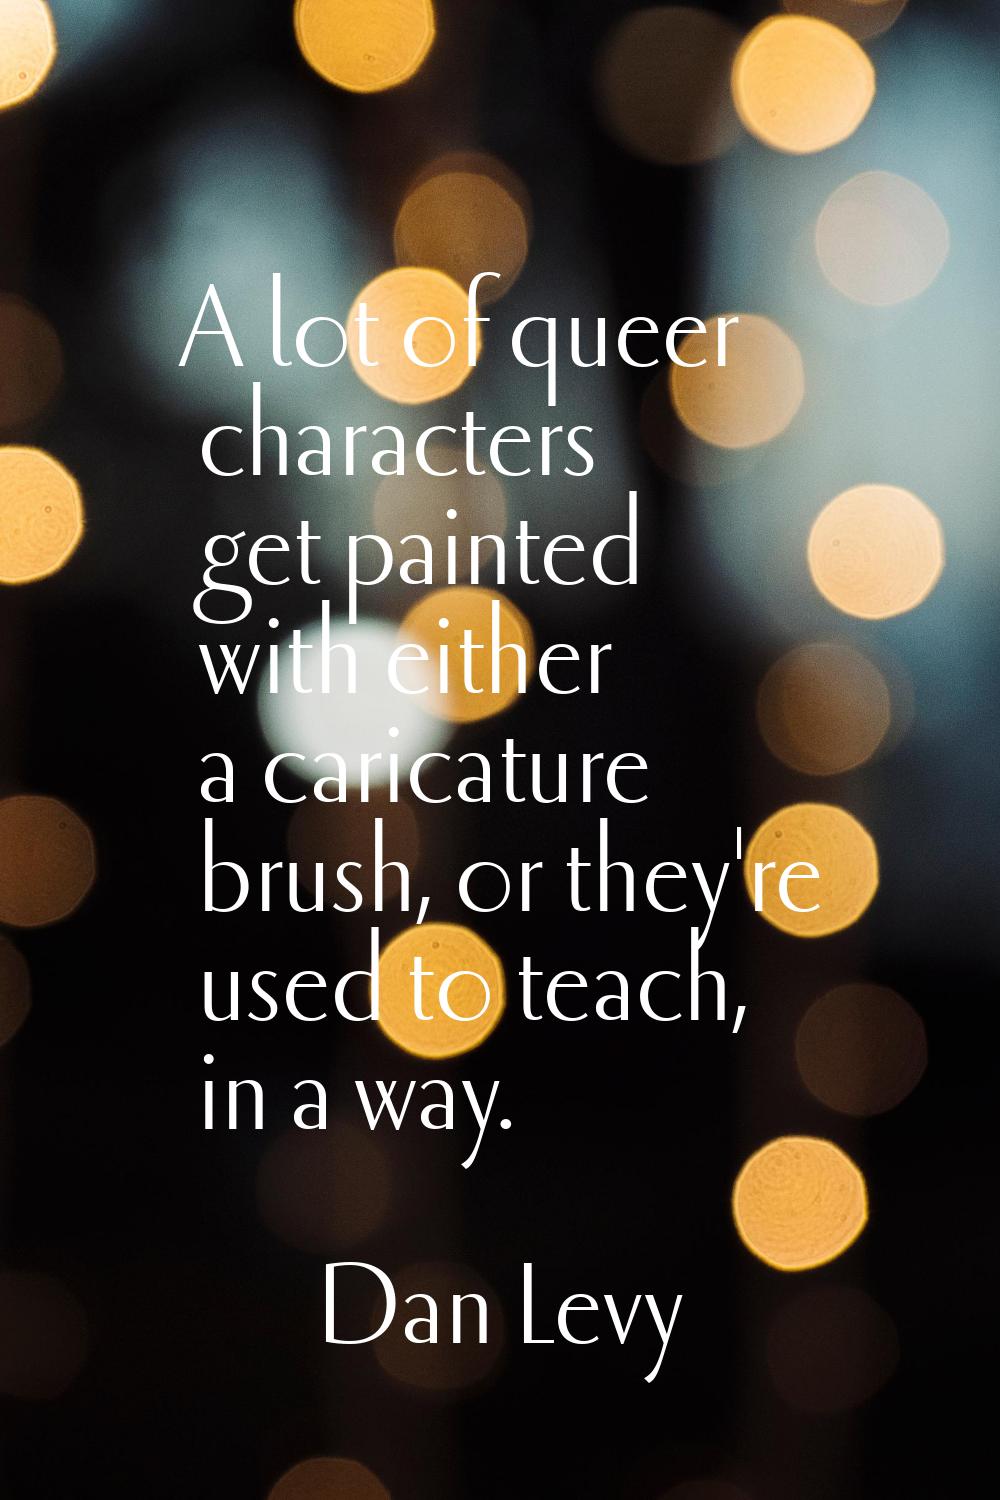 A lot of queer characters get painted with either a caricature brush, or they're used to teach, in 